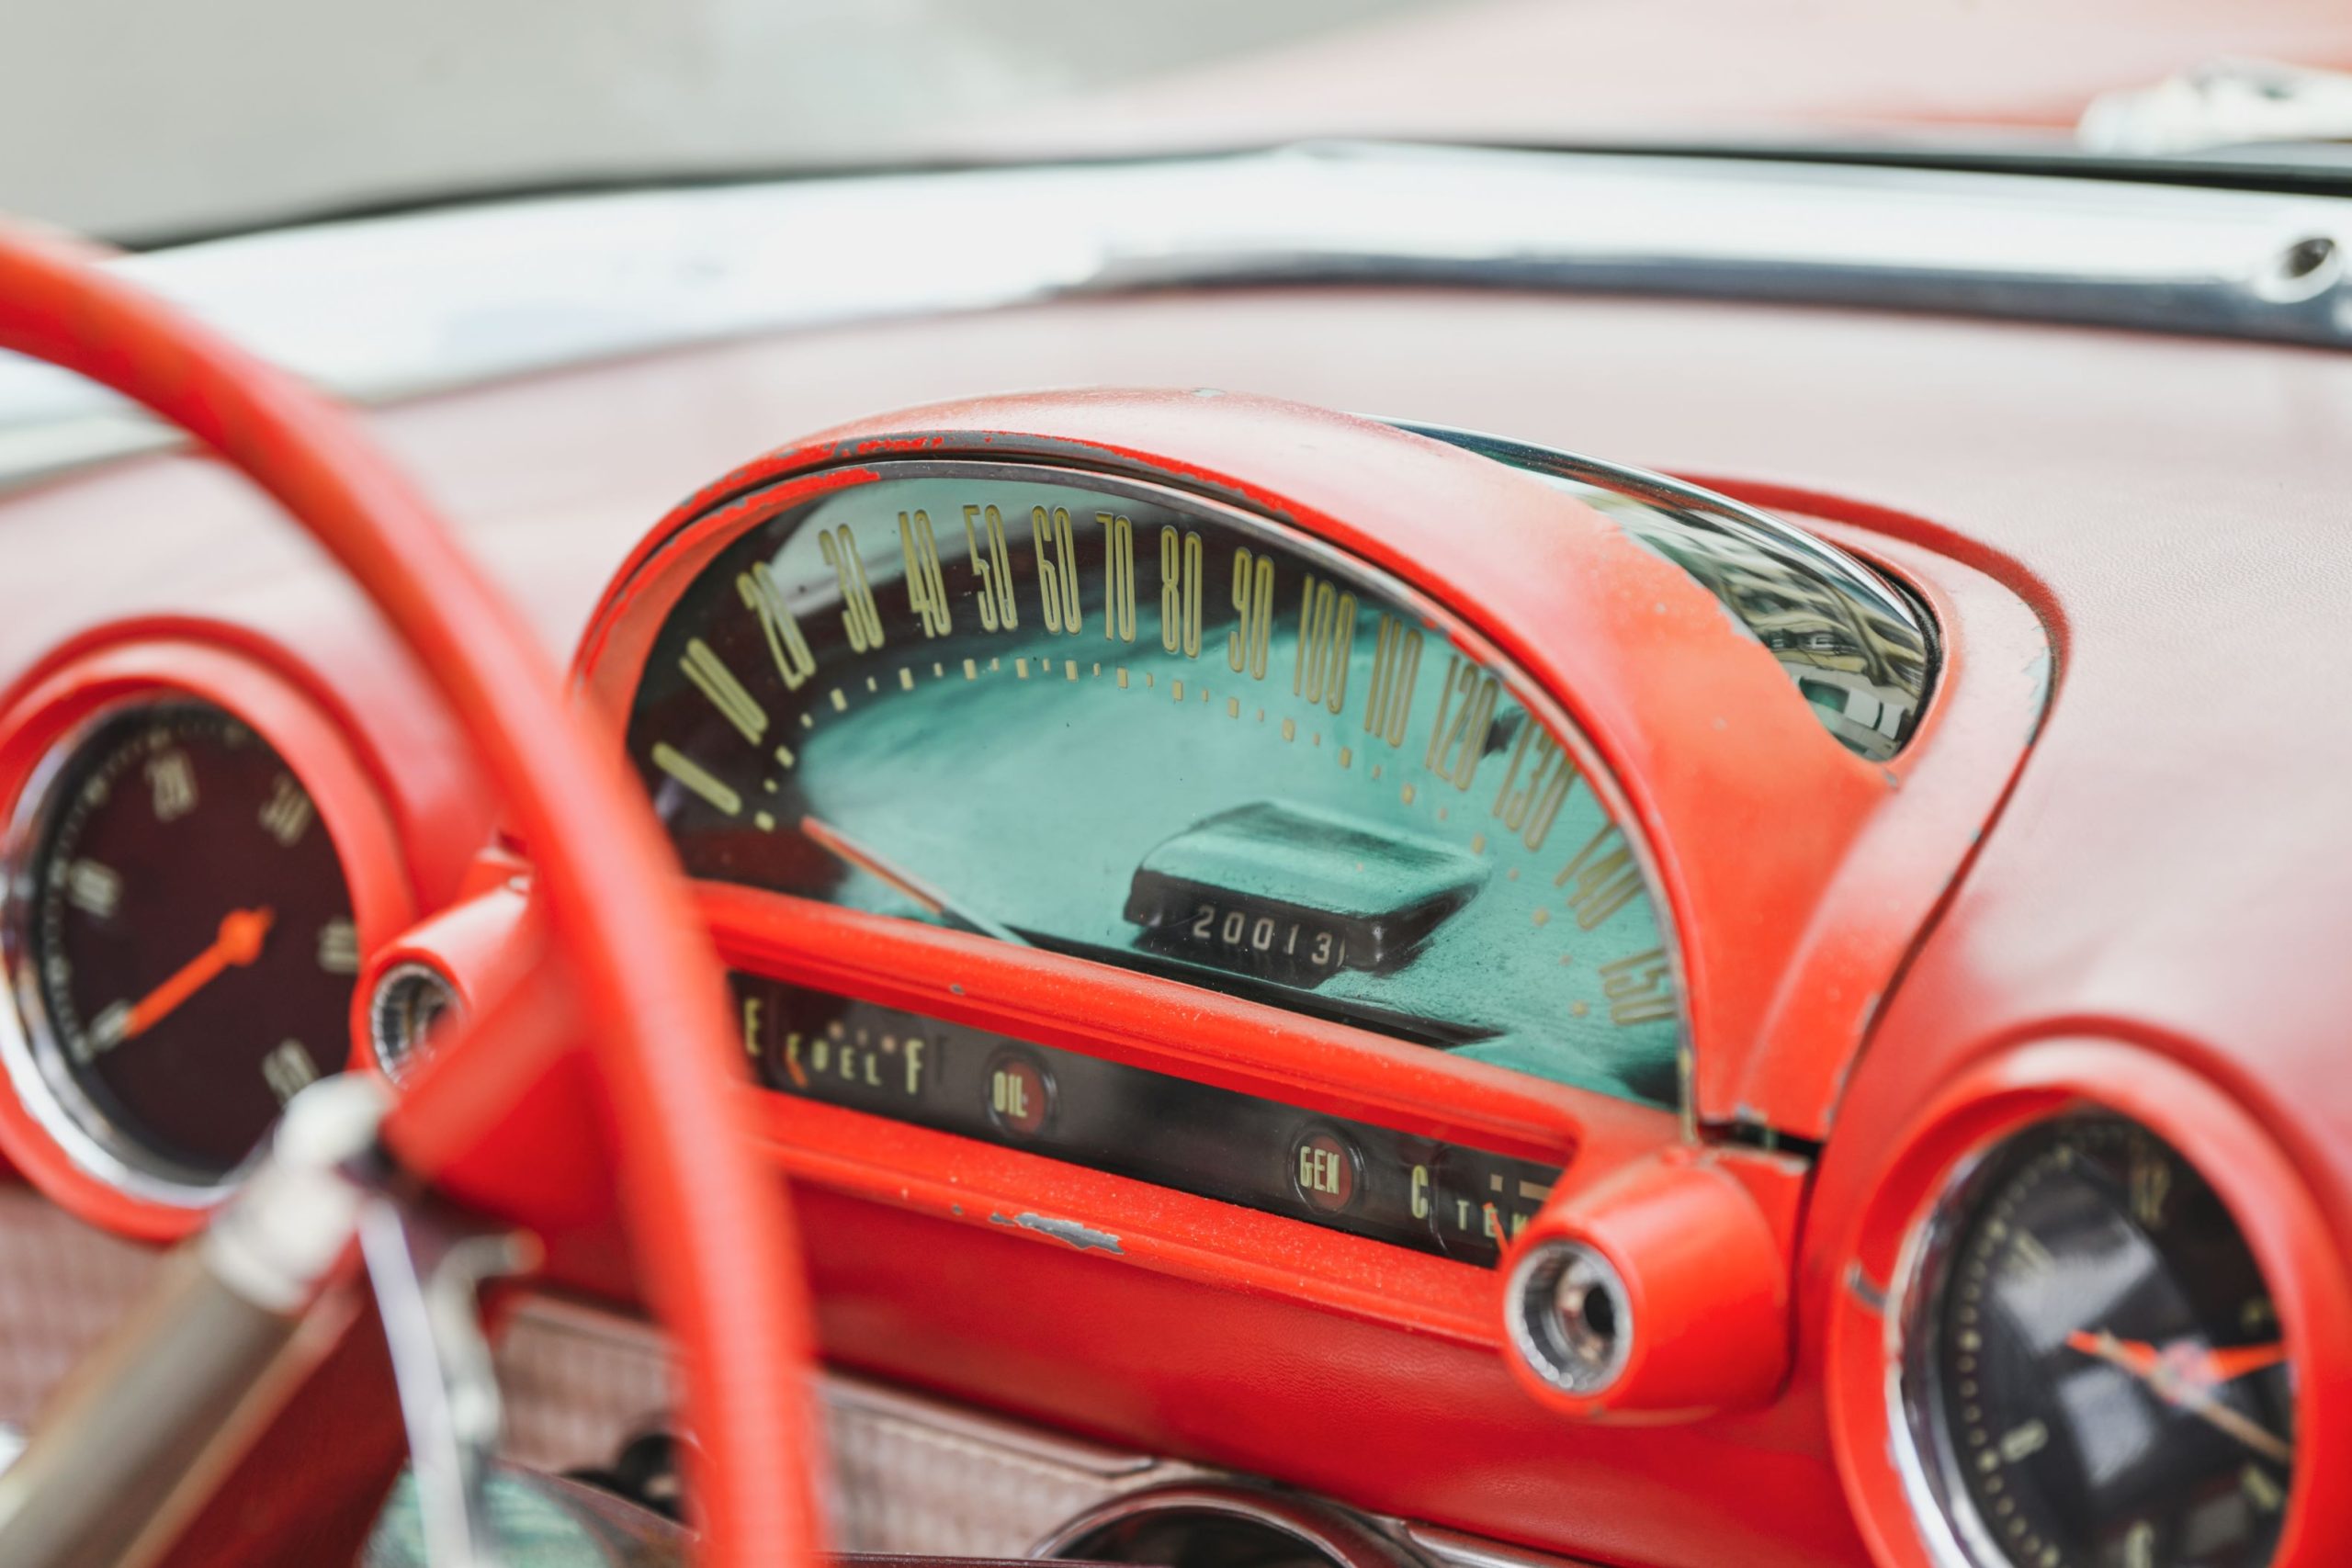 dashboard of a vintage car in red